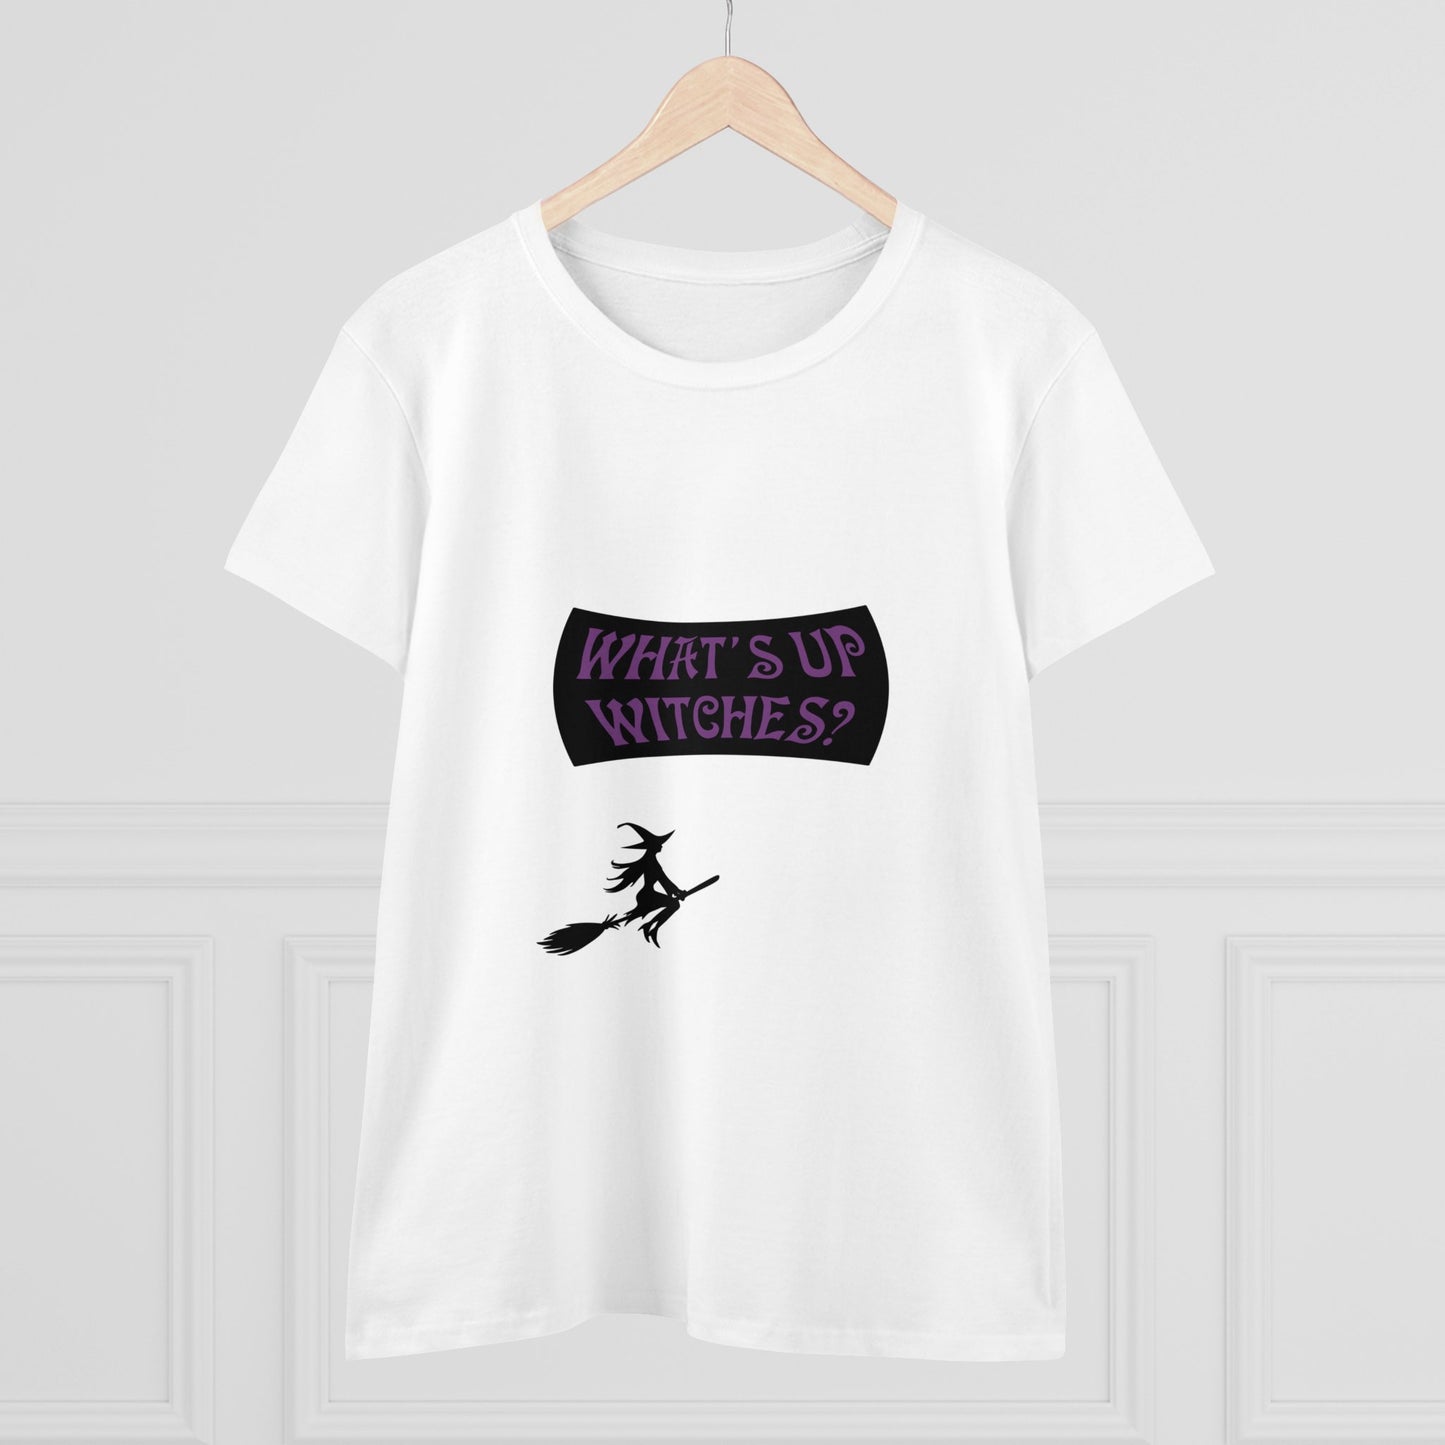 Women's Midweight Witch Cotton Tee